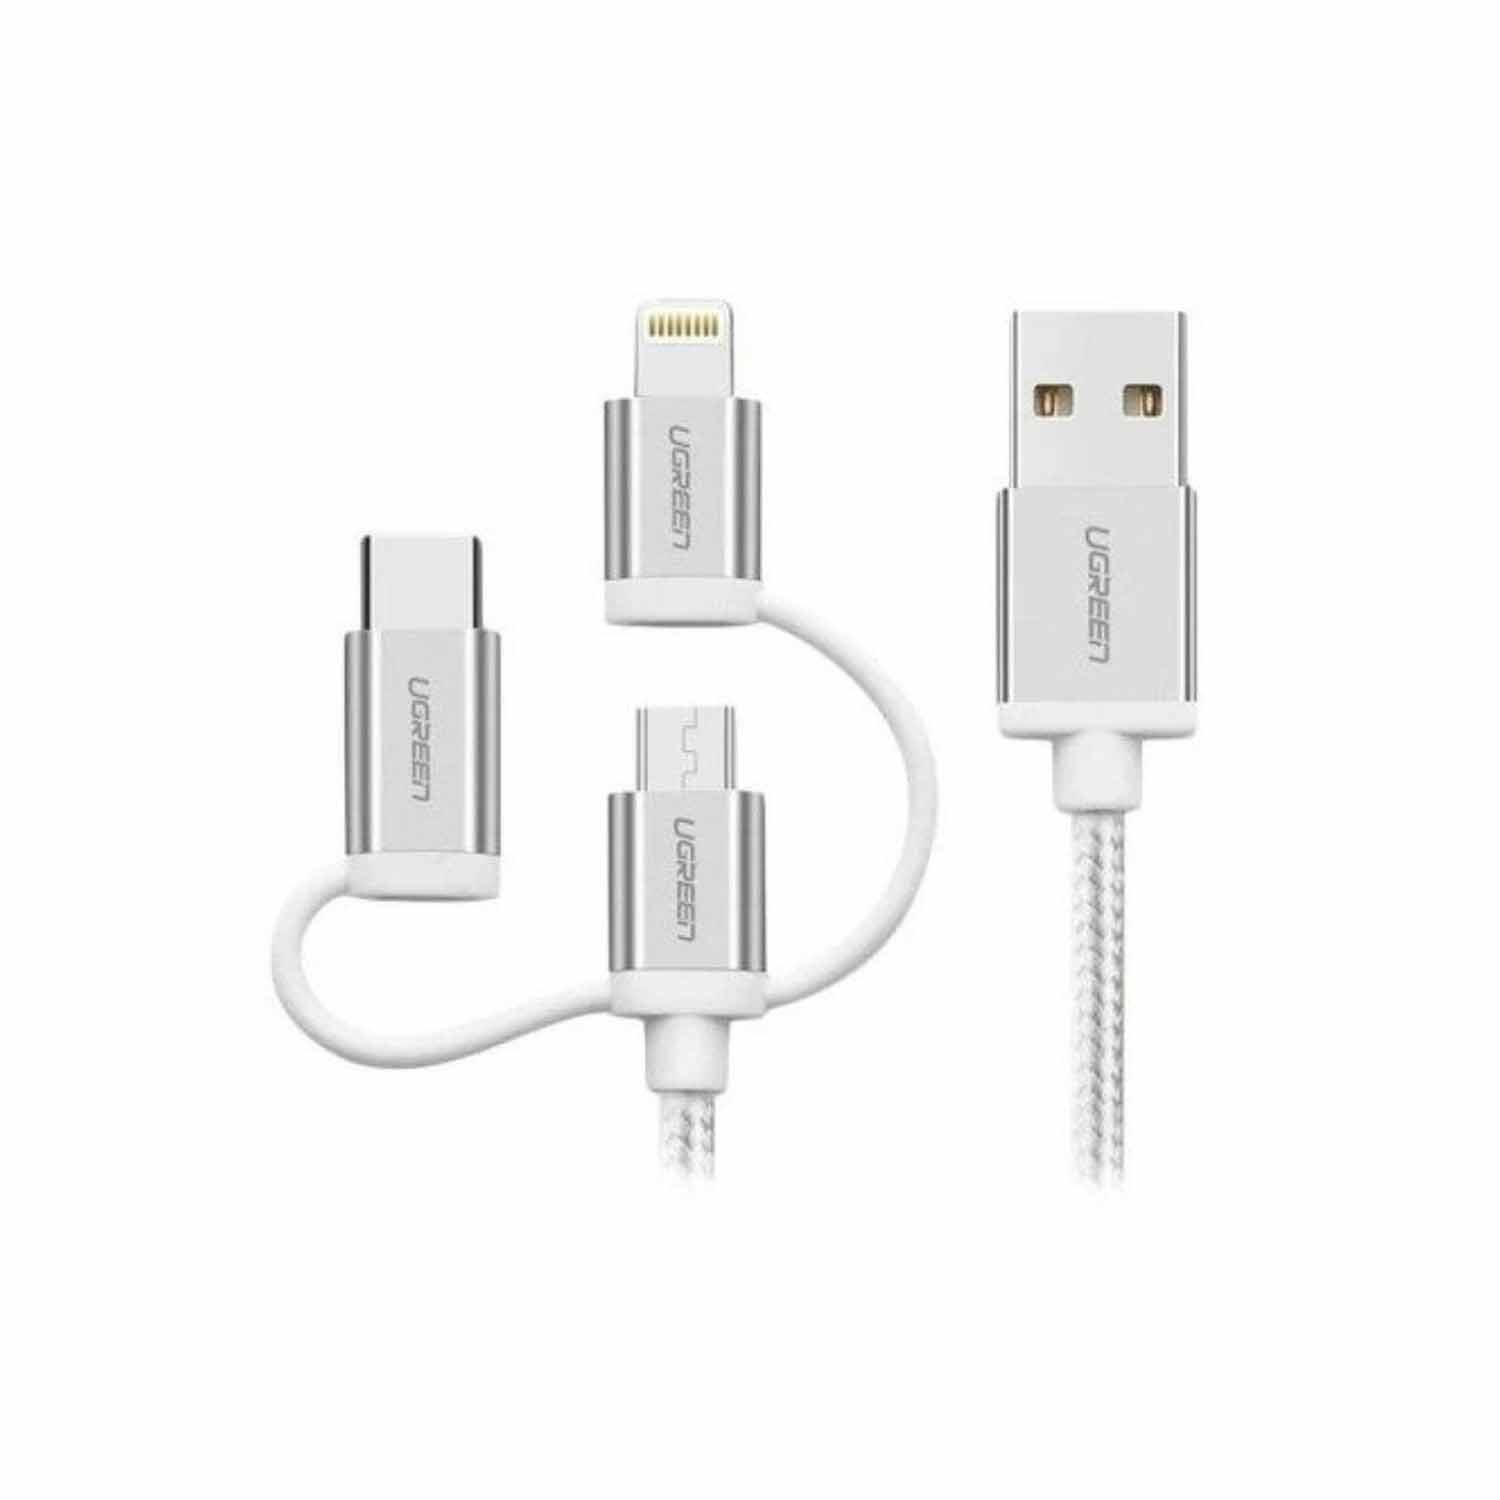 Cable Ugreen Usb 2.0 3 In 1 A/M To Micro B+Lightning+Usb-C 1.5M 50203 Silver